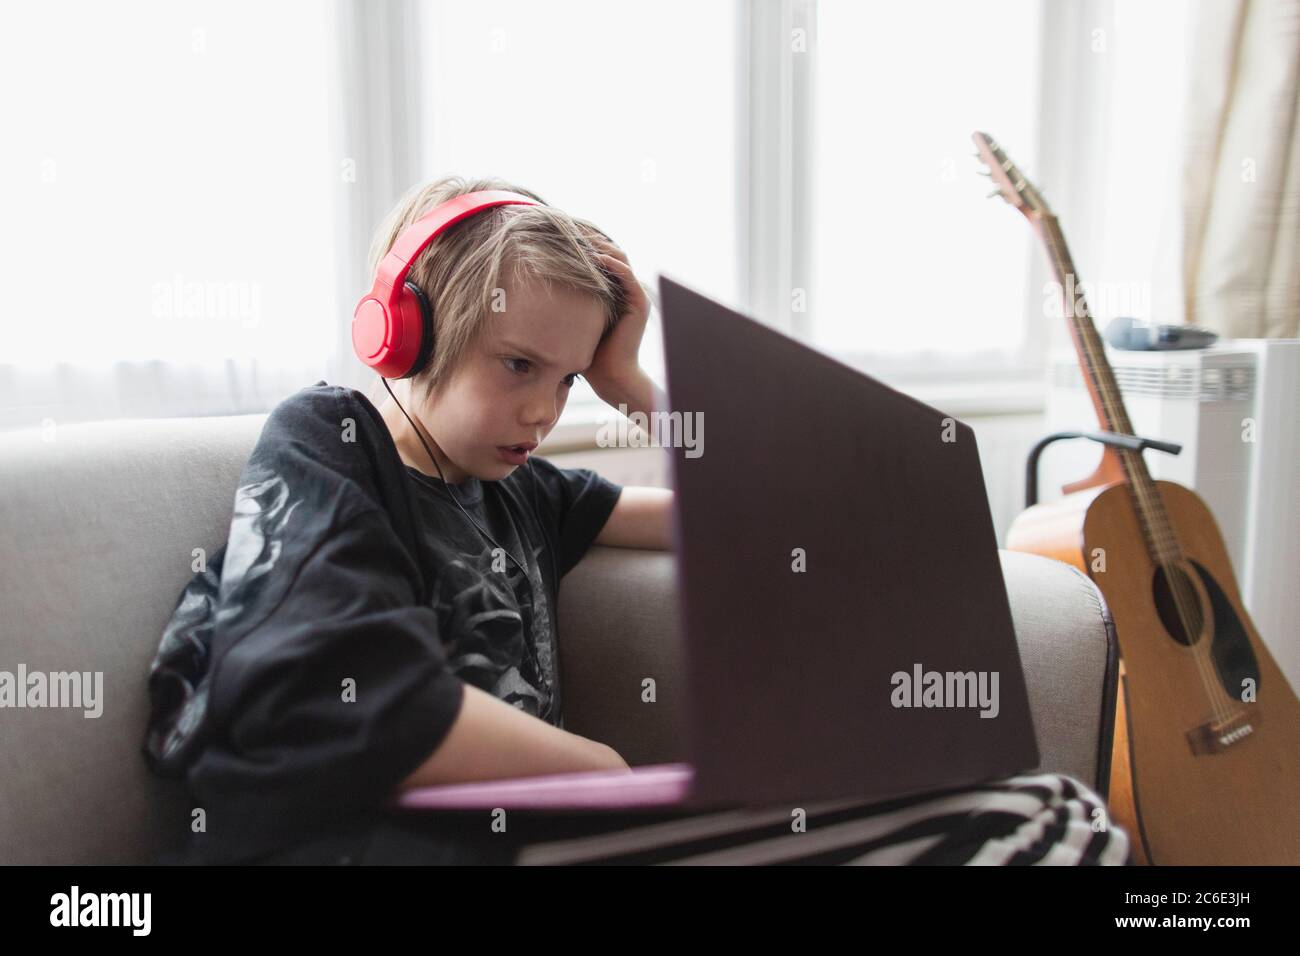 Boy with headphones and laptop on living room sofa Stock Photo